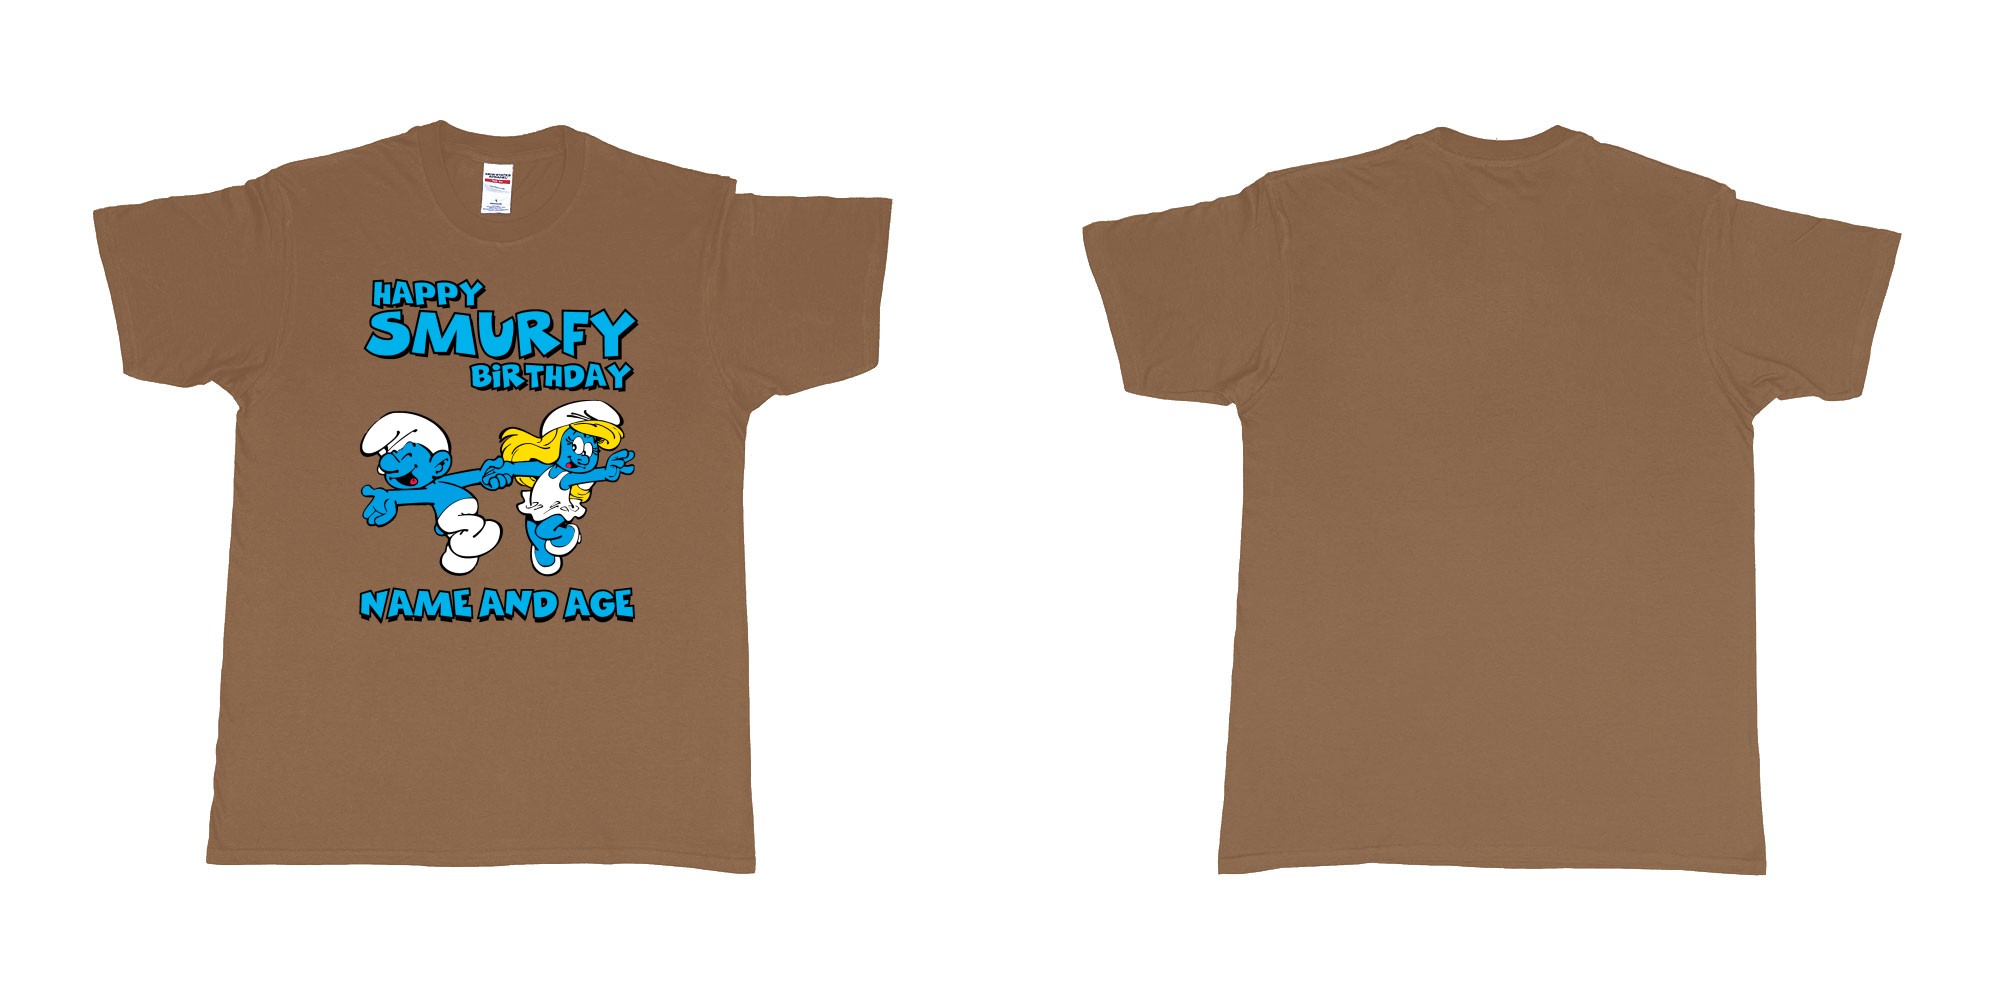 Custom tshirt design happy smurfy birthday in fabric color chestnut choice your own text made in Bali by The Pirate Way